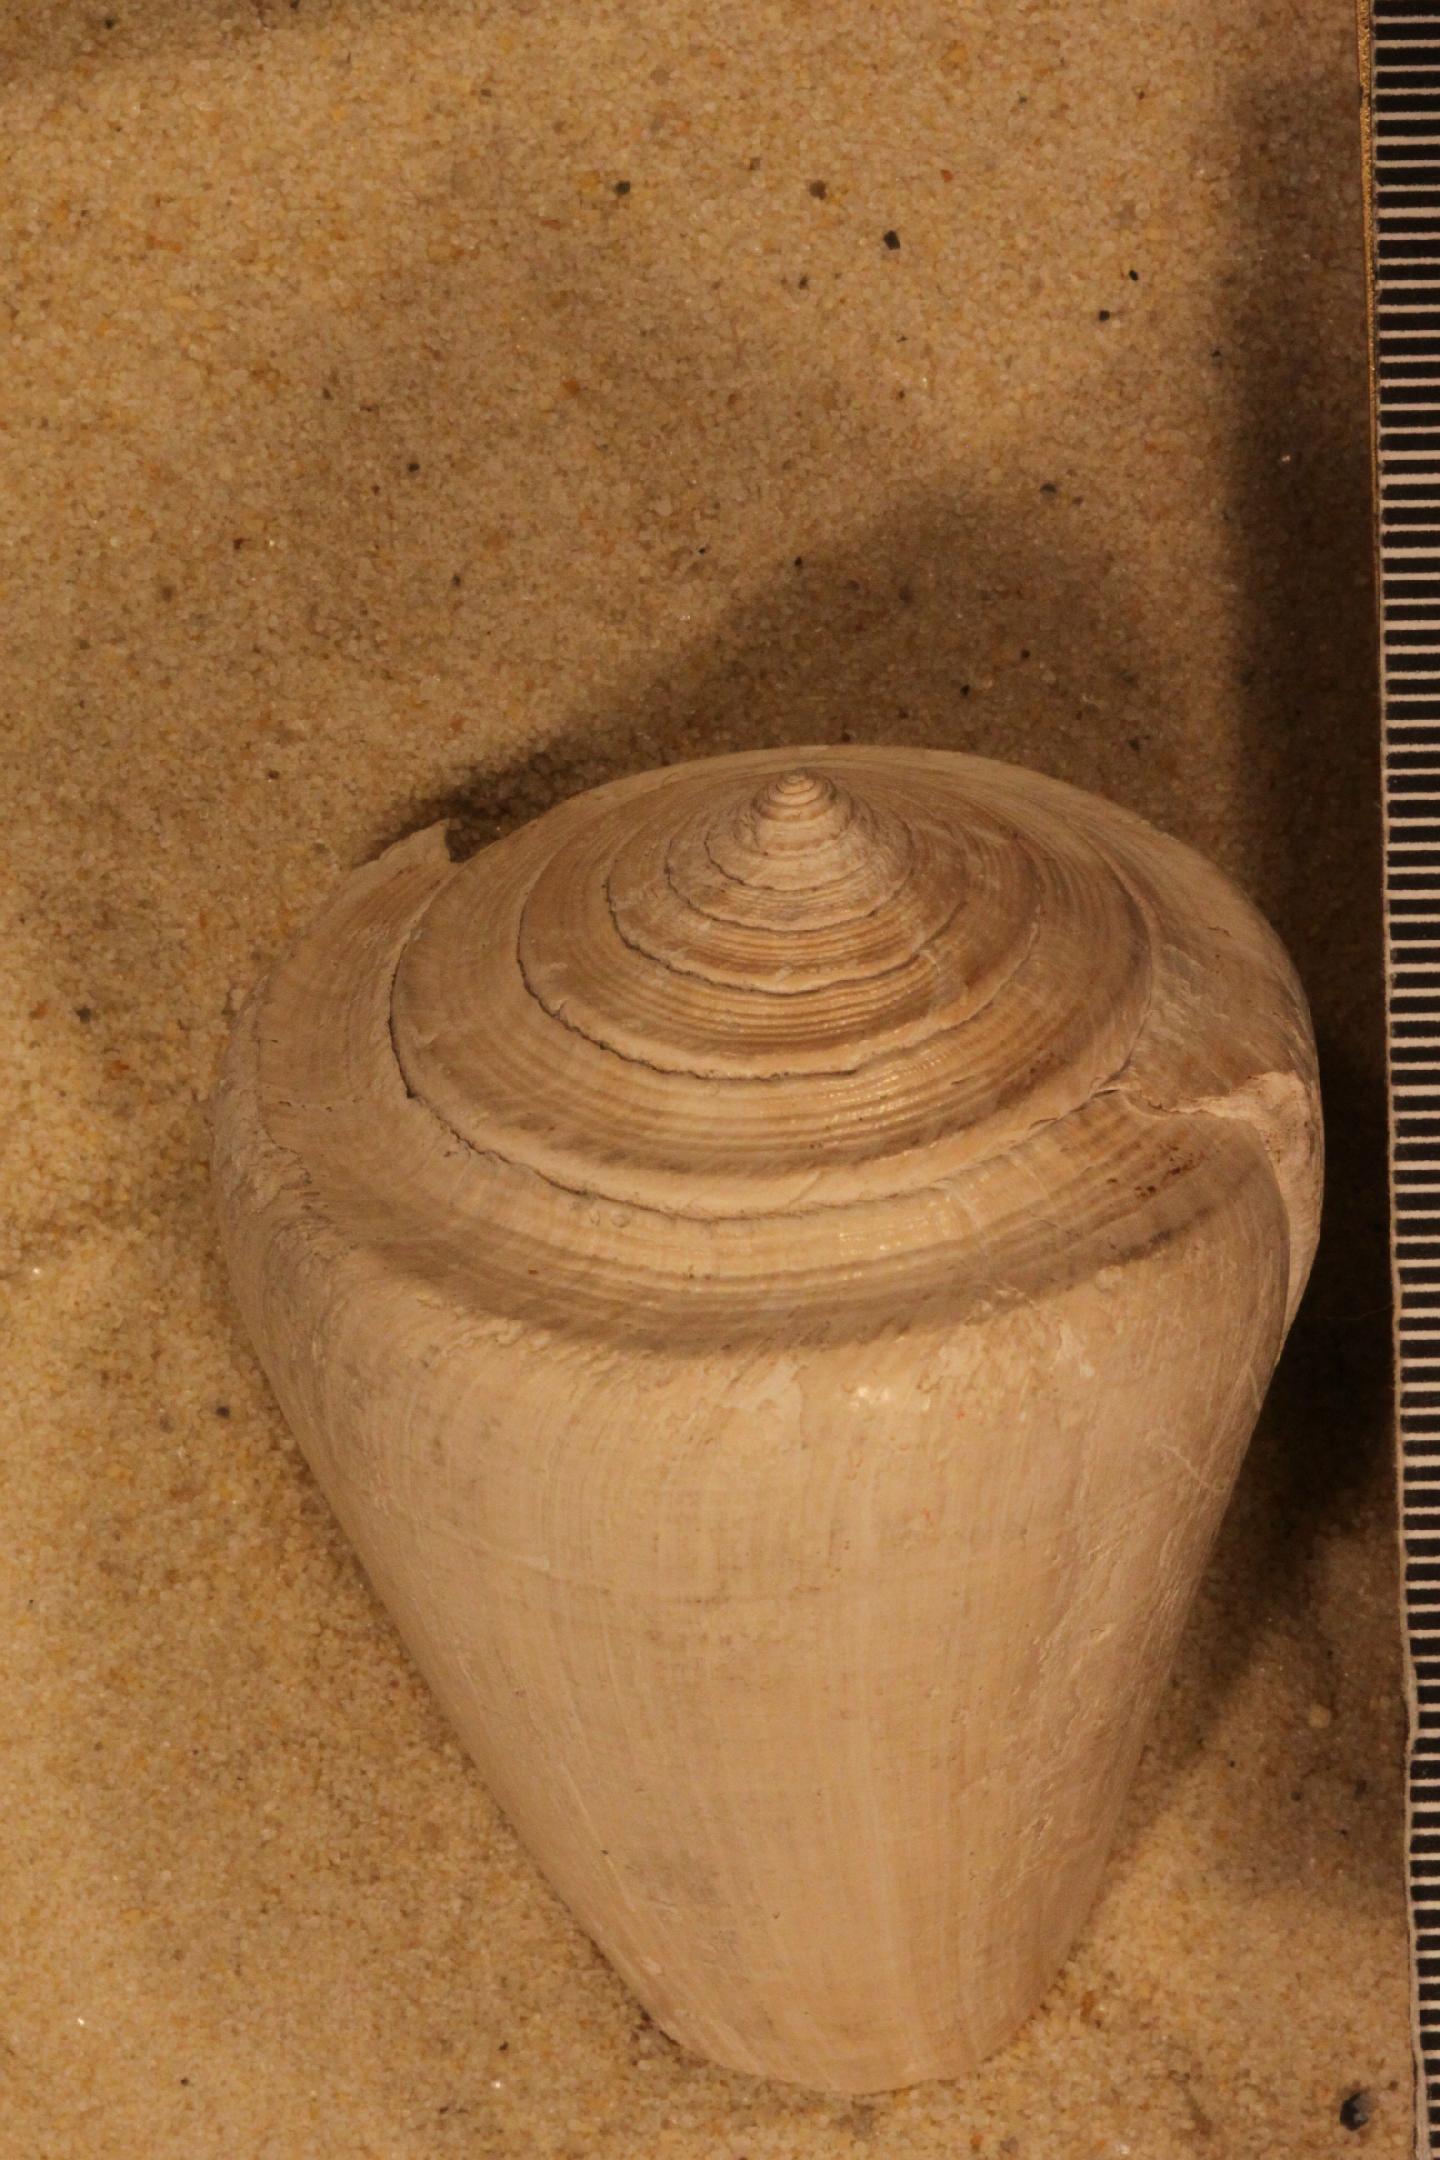 To NHMUK collection (Conus haytensis Sowerby, 1849; Syntype; NHMUK:ecatalogue:562605)